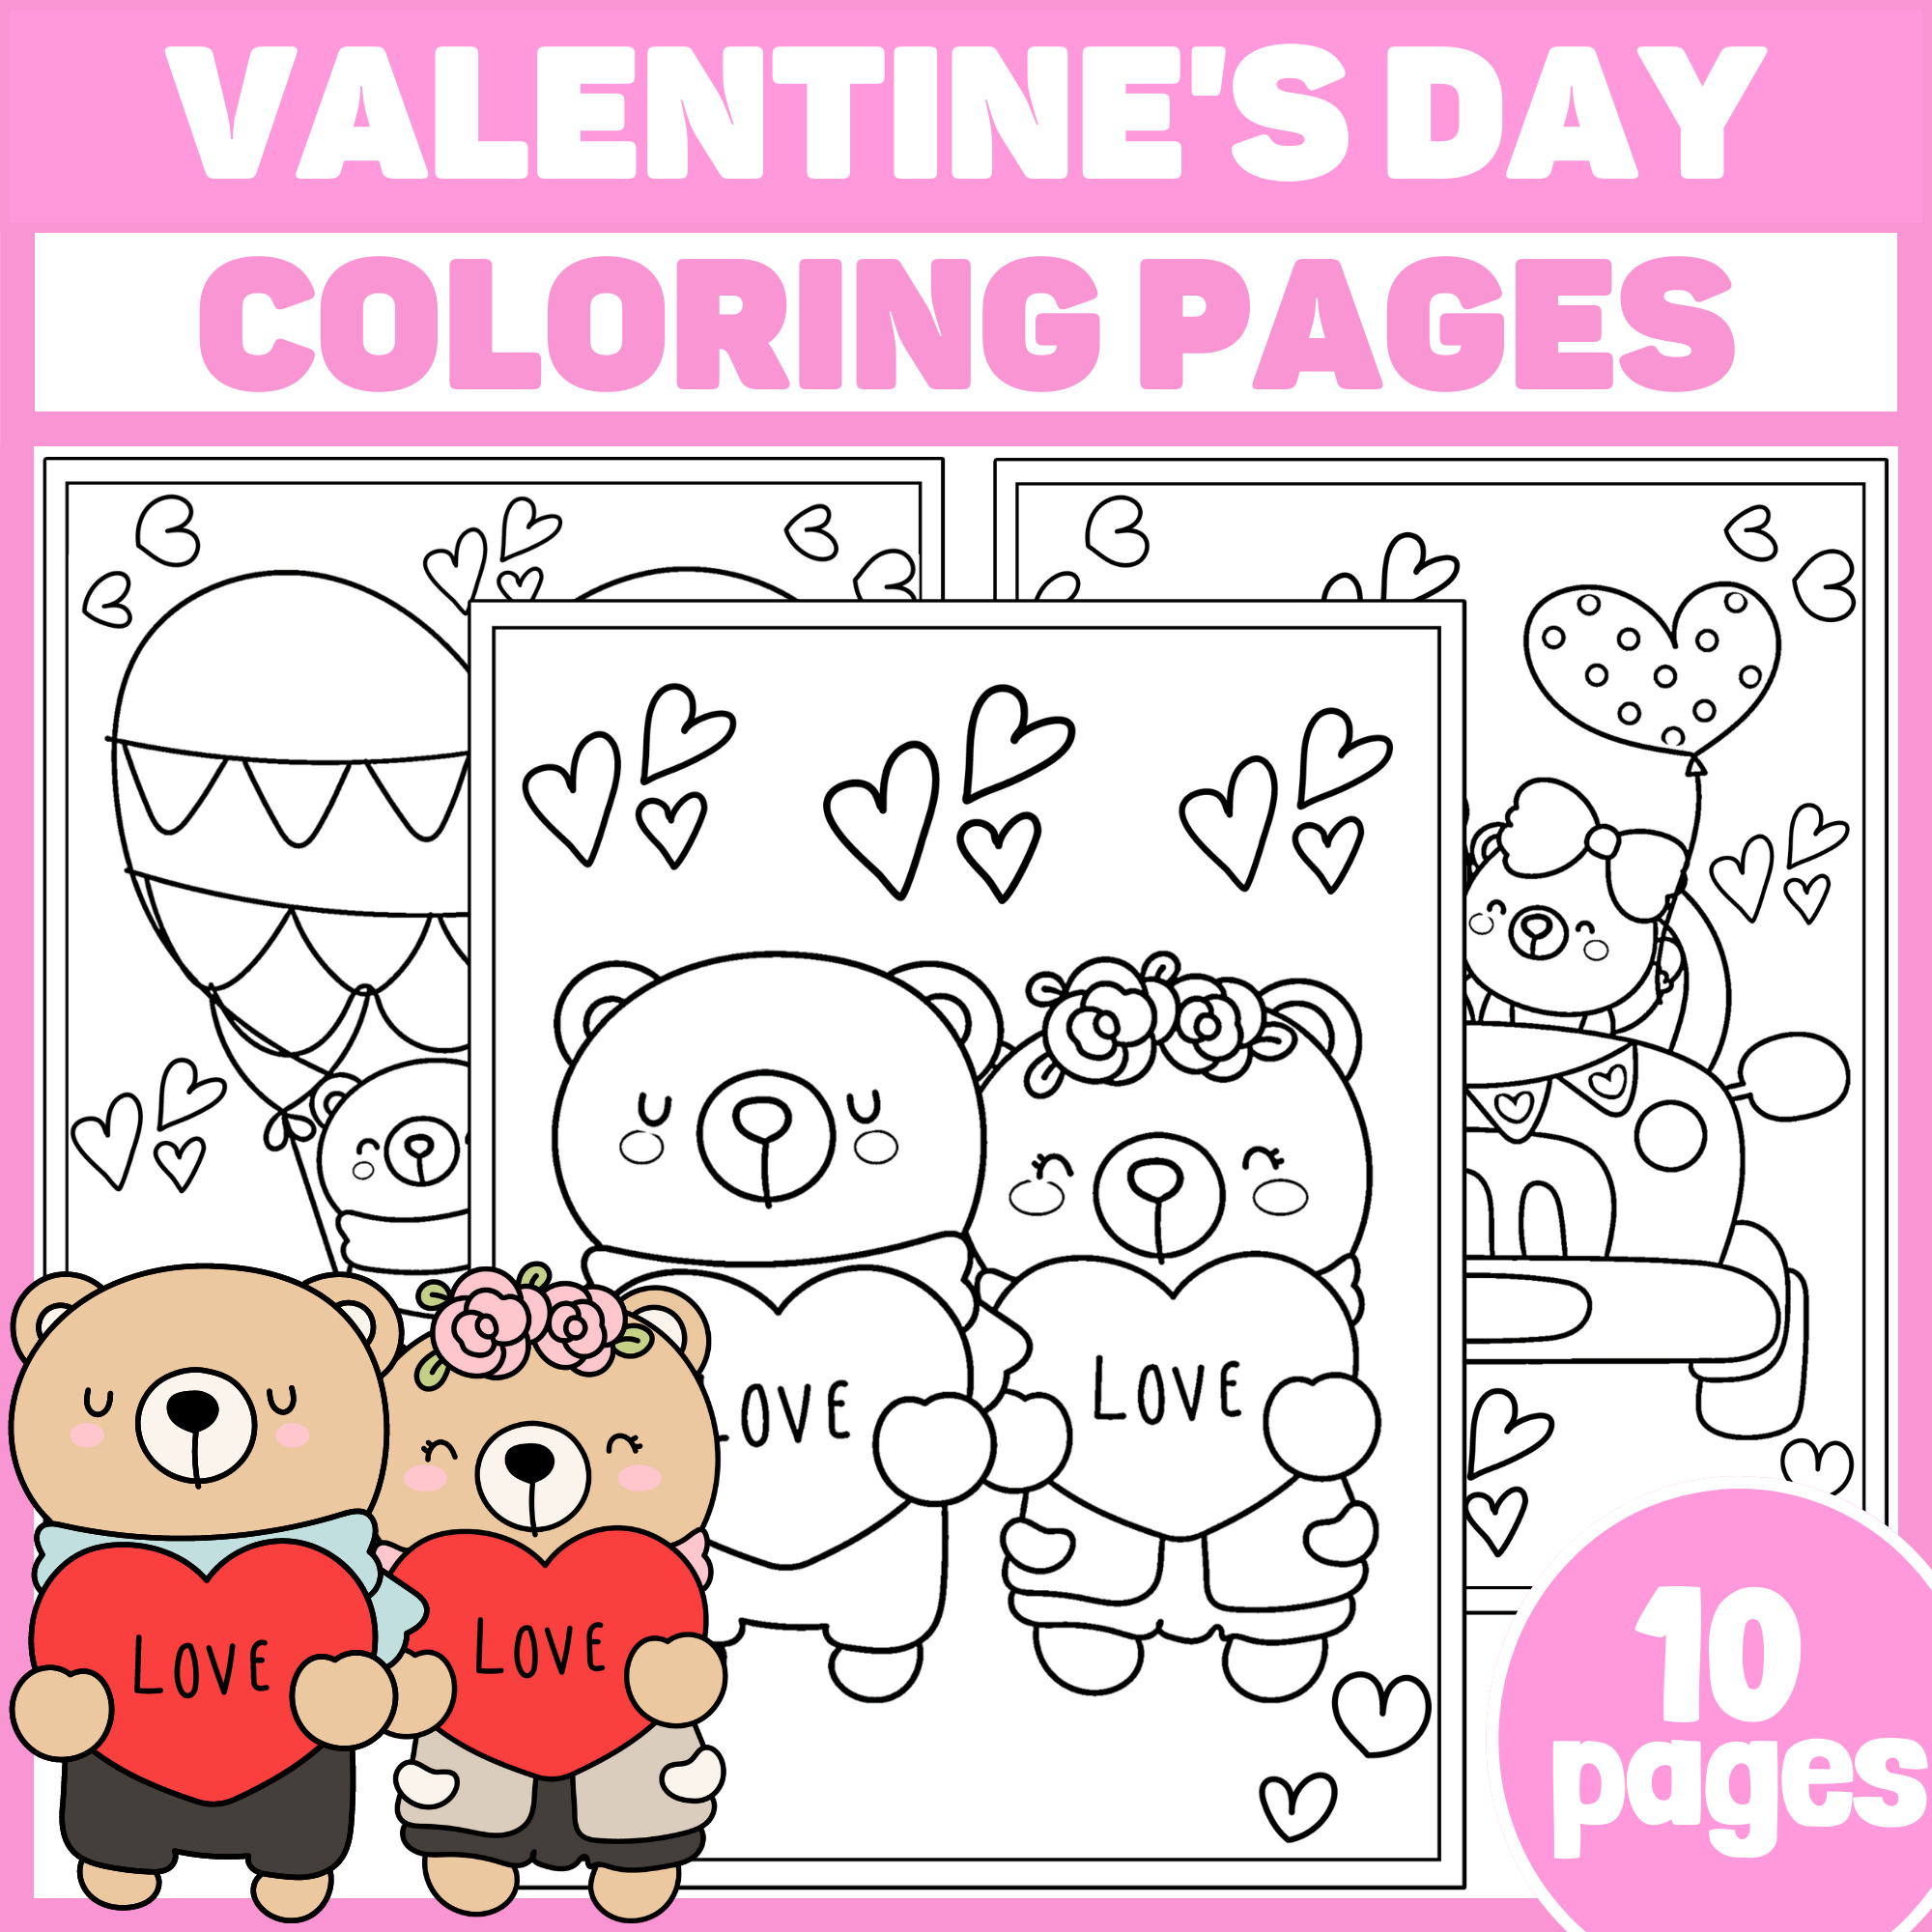 Valentines day coloring pages valentines day bear coloring pages made by teachers